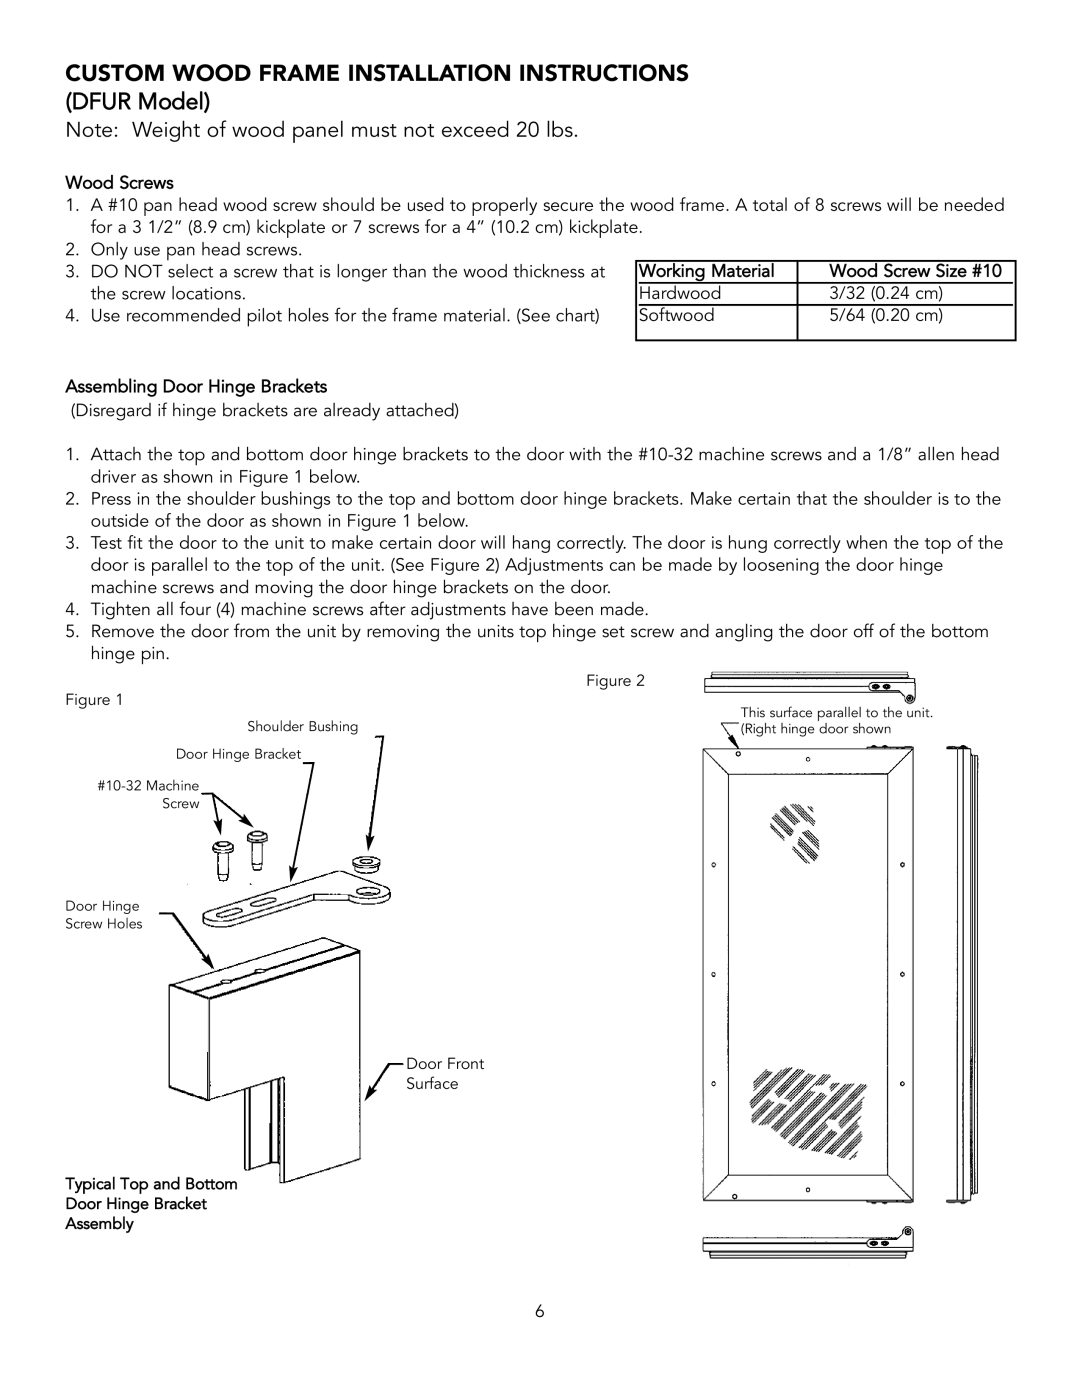 Viking DUAR154 Custom Wood Frame Installation Instructions, Note Weight of wood panel must not exceed 20 lbs, DFUR Model 